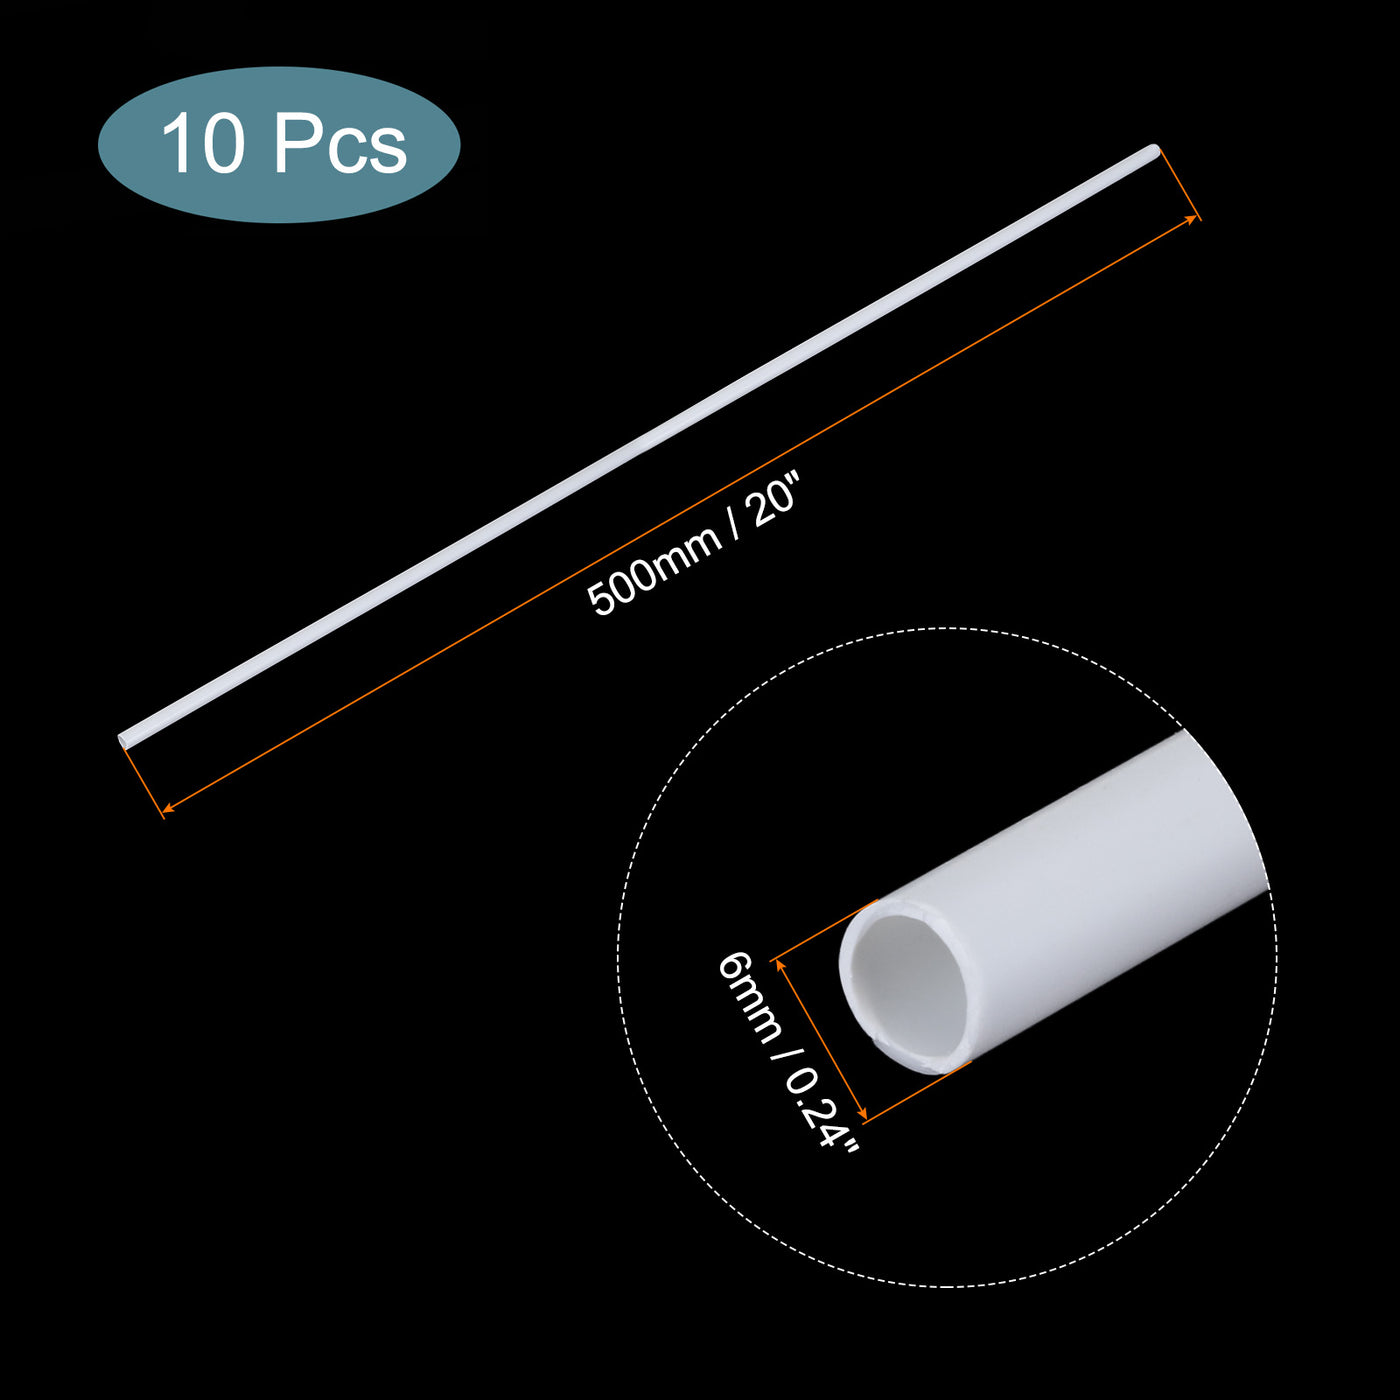 Harfington 10pcs 20" Plastic Model Tube ABS Solid Round Bar 0.24" OD White Easy Processing for Architectural Model Making DIY